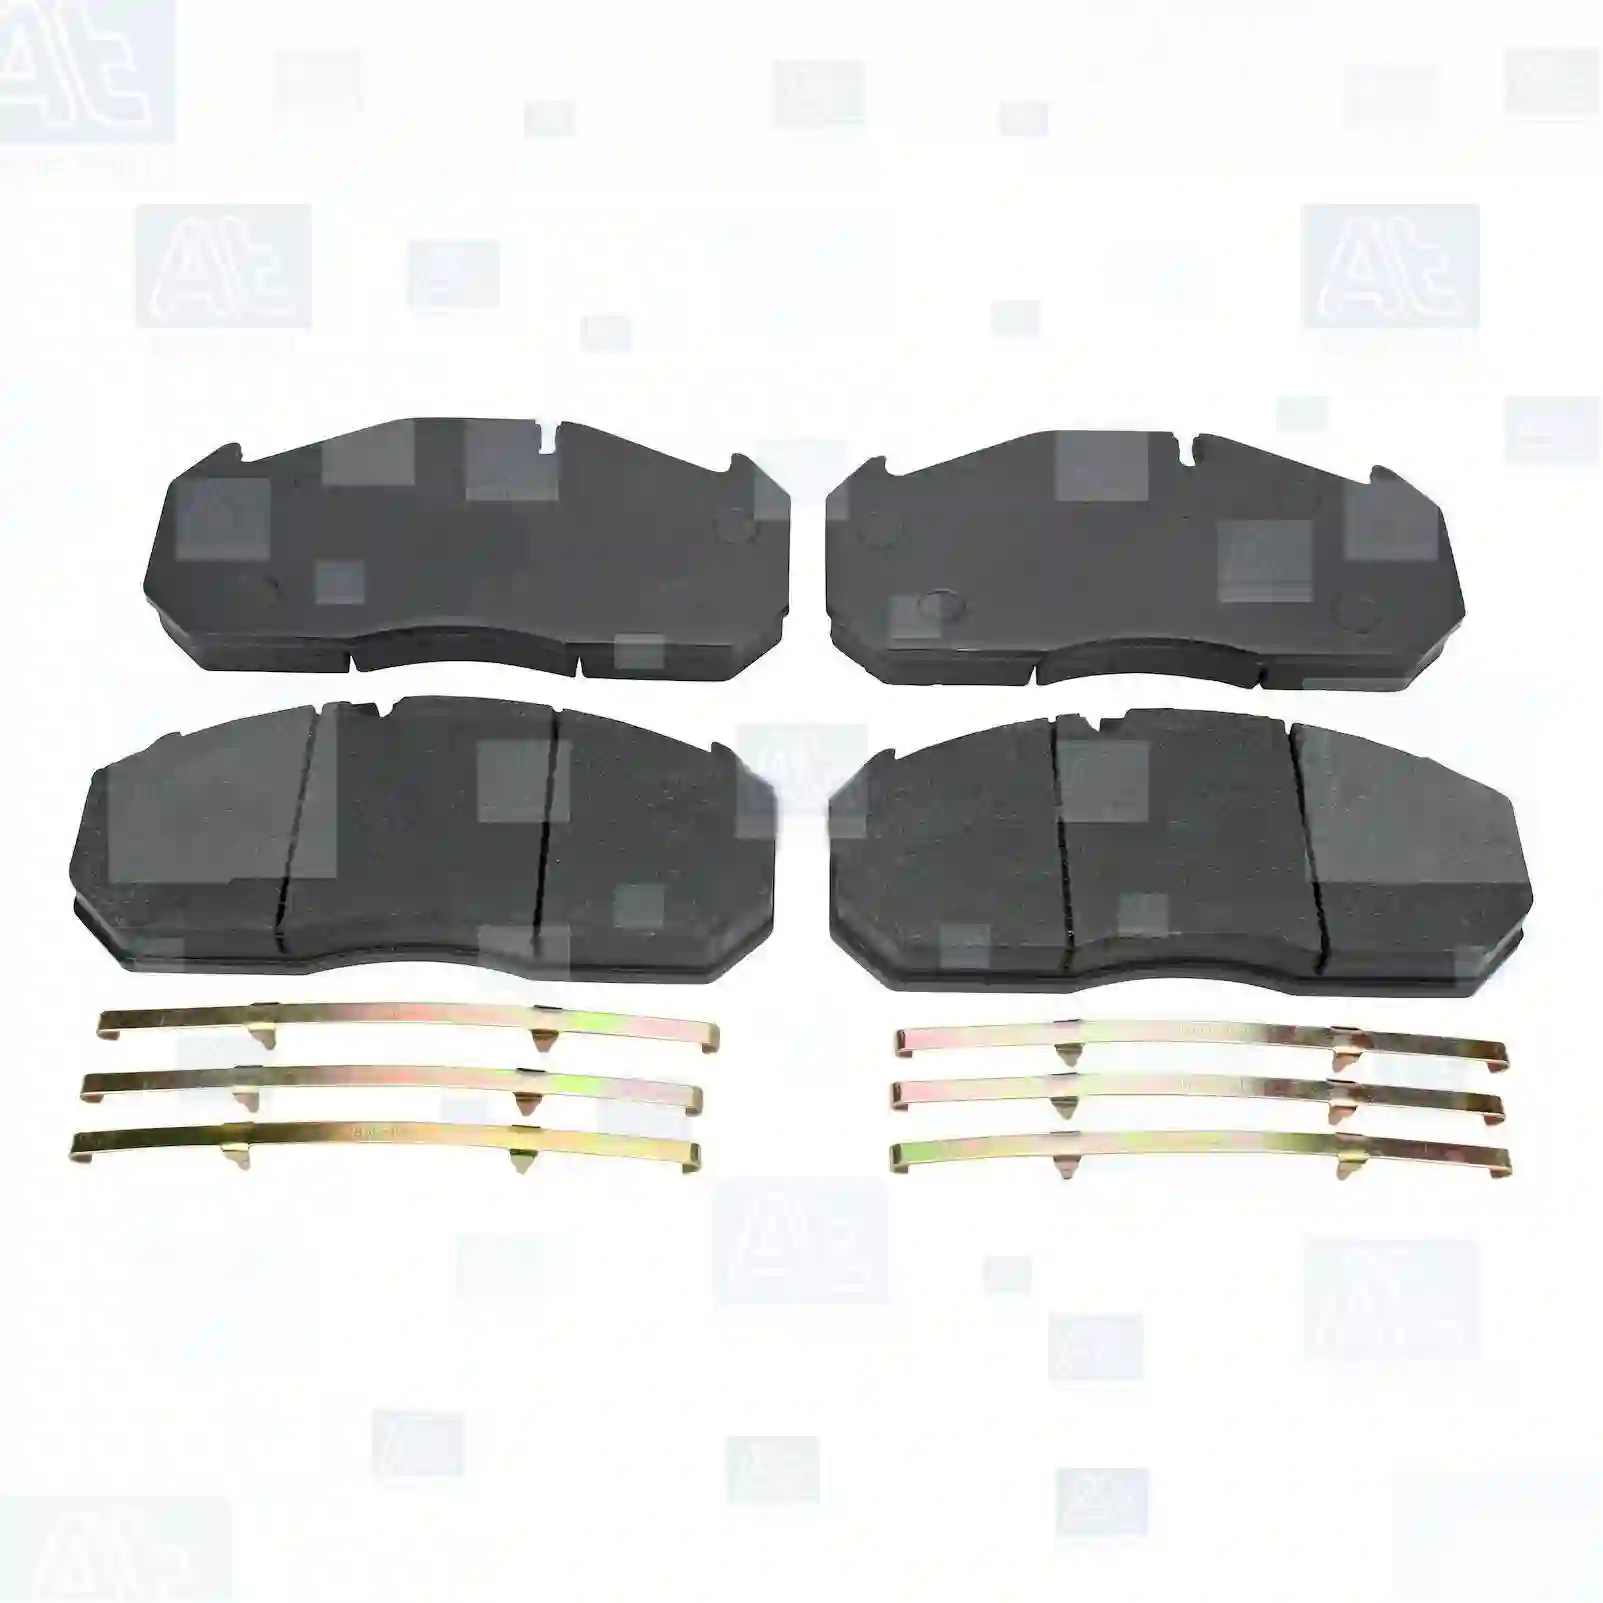 Disc brake pad kit, at no 77713623, oem no: 08108206036, 08285388435, 08285388533, 08285408463, 08285408534, 81508205005, 81508205006, 81508205007, 81508205020, 81508205021, 81508205039, 81508205040, 81508205041, 81508205047, 81508205048, 81508205064, 81508205066, 81508206000, 81508206001, 81508206002, 81508206003, 81508206004, 81508206005, 81508206014, 81508206015, 81508206016, 81508206017, 81508206019, 81508206024, 81508206025, 81508206026, 81508206027, 81508206034, 81508206035, 81508206036, 81508206038, 81508206044, 81508206045, 81508206046, 82854084630, 82854085340, 0024200820, 0024205520, 0034205520, 0034208420, 3564210210, 5010151214, 7073453861, 0068320504, MDP3030K, MDP5017, MDP5038, MDP5054, MDP5065, 1057004400, 1057004400, 68320504NGZ, 8285388435, 8285388533, 8285388583, 8285408453, 8285408463, 82854084640, 8285408534, 8285521000, 8285522000, 8285525000, 8285526000, ZG50417-0008 At Spare Part | Engine, Accelerator Pedal, Camshaft, Connecting Rod, Crankcase, Crankshaft, Cylinder Head, Engine Suspension Mountings, Exhaust Manifold, Exhaust Gas Recirculation, Filter Kits, Flywheel Housing, General Overhaul Kits, Engine, Intake Manifold, Oil Cleaner, Oil Cooler, Oil Filter, Oil Pump, Oil Sump, Piston & Liner, Sensor & Switch, Timing Case, Turbocharger, Cooling System, Belt Tensioner, Coolant Filter, Coolant Pipe, Corrosion Prevention Agent, Drive, Expansion Tank, Fan, Intercooler, Monitors & Gauges, Radiator, Thermostat, V-Belt / Timing belt, Water Pump, Fuel System, Electronical Injector Unit, Feed Pump, Fuel Filter, cpl., Fuel Gauge Sender,  Fuel Line, Fuel Pump, Fuel Tank, Injection Line Kit, Injection Pump, Exhaust System, Clutch & Pedal, Gearbox, Propeller Shaft, Axles, Brake System, Hubs & Wheels, Suspension, Leaf Spring, Universal Parts / Accessories, Steering, Electrical System, Cabin Disc brake pad kit, at no 77713623, oem no: 08108206036, 08285388435, 08285388533, 08285408463, 08285408534, 81508205005, 81508205006, 81508205007, 81508205020, 81508205021, 81508205039, 81508205040, 81508205041, 81508205047, 81508205048, 81508205064, 81508205066, 81508206000, 81508206001, 81508206002, 81508206003, 81508206004, 81508206005, 81508206014, 81508206015, 81508206016, 81508206017, 81508206019, 81508206024, 81508206025, 81508206026, 81508206027, 81508206034, 81508206035, 81508206036, 81508206038, 81508206044, 81508206045, 81508206046, 82854084630, 82854085340, 0024200820, 0024205520, 0034205520, 0034208420, 3564210210, 5010151214, 7073453861, 0068320504, MDP3030K, MDP5017, MDP5038, MDP5054, MDP5065, 1057004400, 1057004400, 68320504NGZ, 8285388435, 8285388533, 8285388583, 8285408453, 8285408463, 82854084640, 8285408534, 8285521000, 8285522000, 8285525000, 8285526000, ZG50417-0008 At Spare Part | Engine, Accelerator Pedal, Camshaft, Connecting Rod, Crankcase, Crankshaft, Cylinder Head, Engine Suspension Mountings, Exhaust Manifold, Exhaust Gas Recirculation, Filter Kits, Flywheel Housing, General Overhaul Kits, Engine, Intake Manifold, Oil Cleaner, Oil Cooler, Oil Filter, Oil Pump, Oil Sump, Piston & Liner, Sensor & Switch, Timing Case, Turbocharger, Cooling System, Belt Tensioner, Coolant Filter, Coolant Pipe, Corrosion Prevention Agent, Drive, Expansion Tank, Fan, Intercooler, Monitors & Gauges, Radiator, Thermostat, V-Belt / Timing belt, Water Pump, Fuel System, Electronical Injector Unit, Feed Pump, Fuel Filter, cpl., Fuel Gauge Sender,  Fuel Line, Fuel Pump, Fuel Tank, Injection Line Kit, Injection Pump, Exhaust System, Clutch & Pedal, Gearbox, Propeller Shaft, Axles, Brake System, Hubs & Wheels, Suspension, Leaf Spring, Universal Parts / Accessories, Steering, Electrical System, Cabin